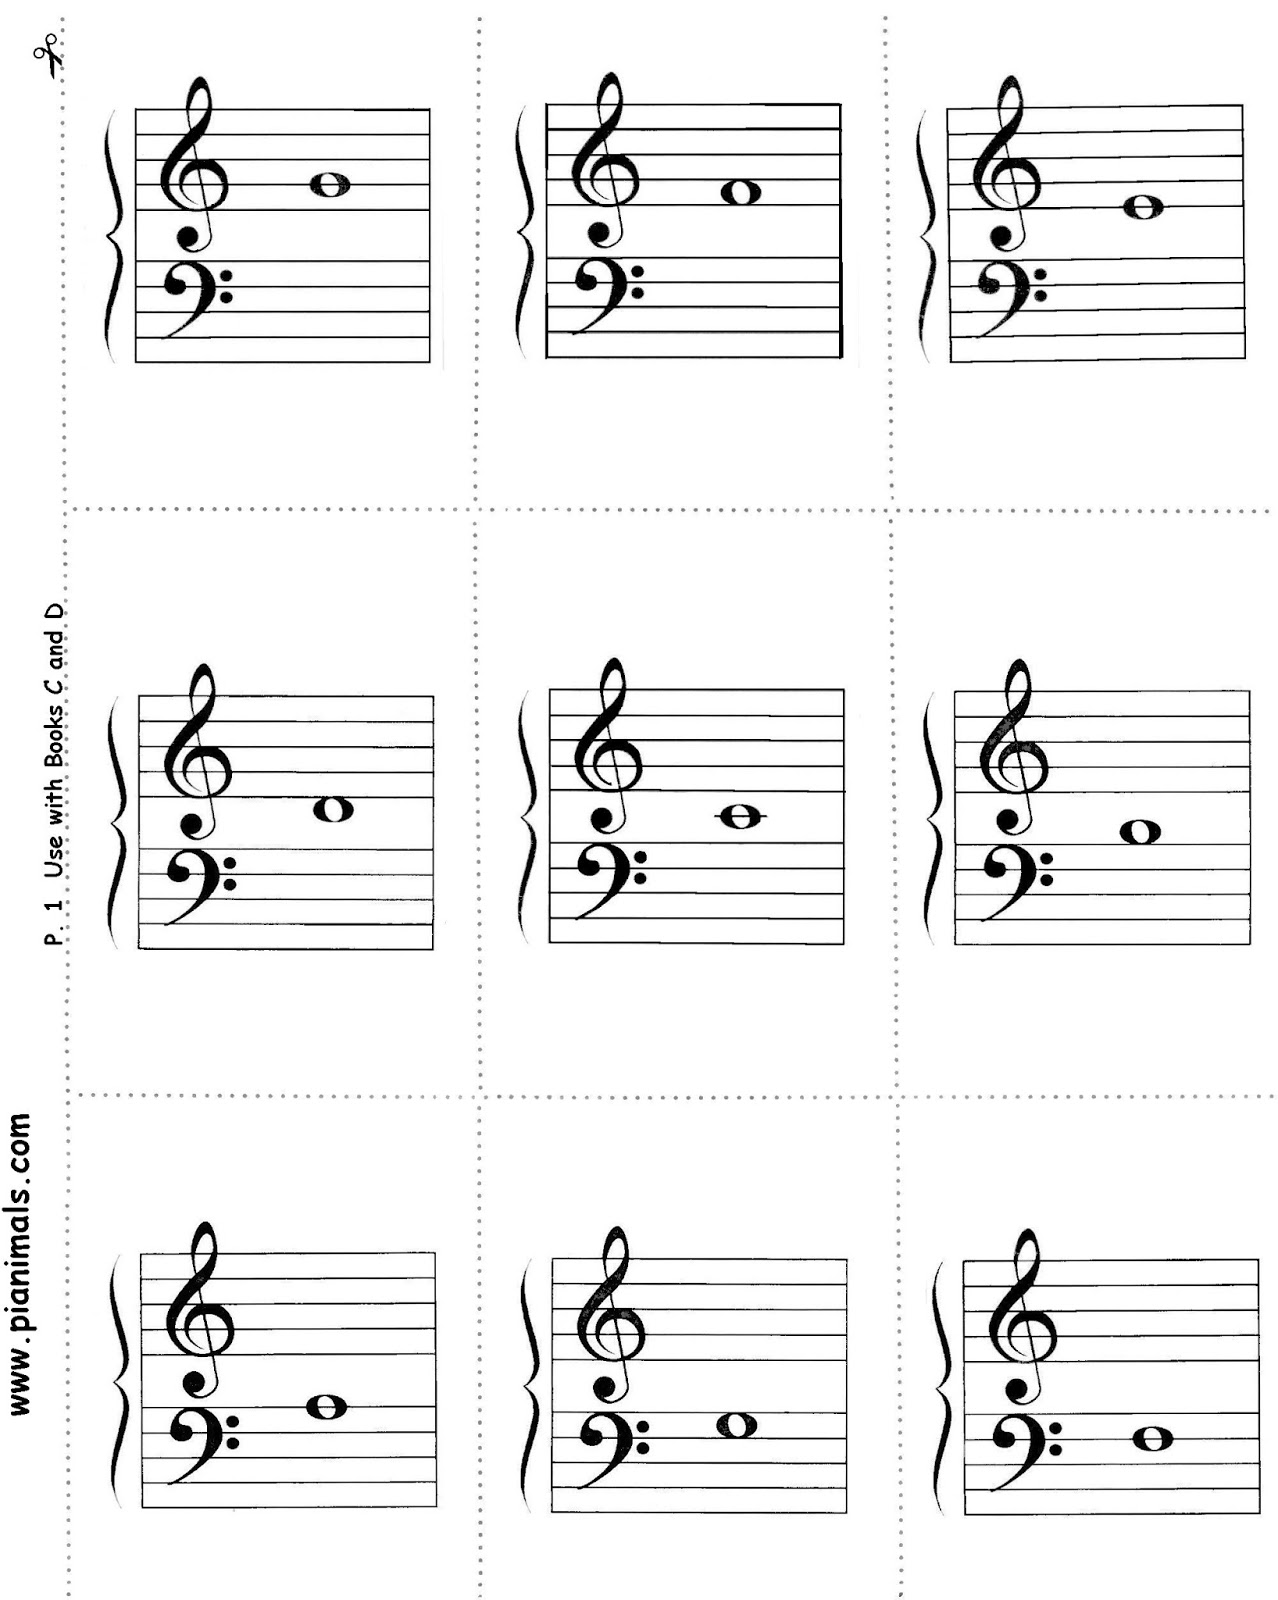 in-harmony-note-flashcards